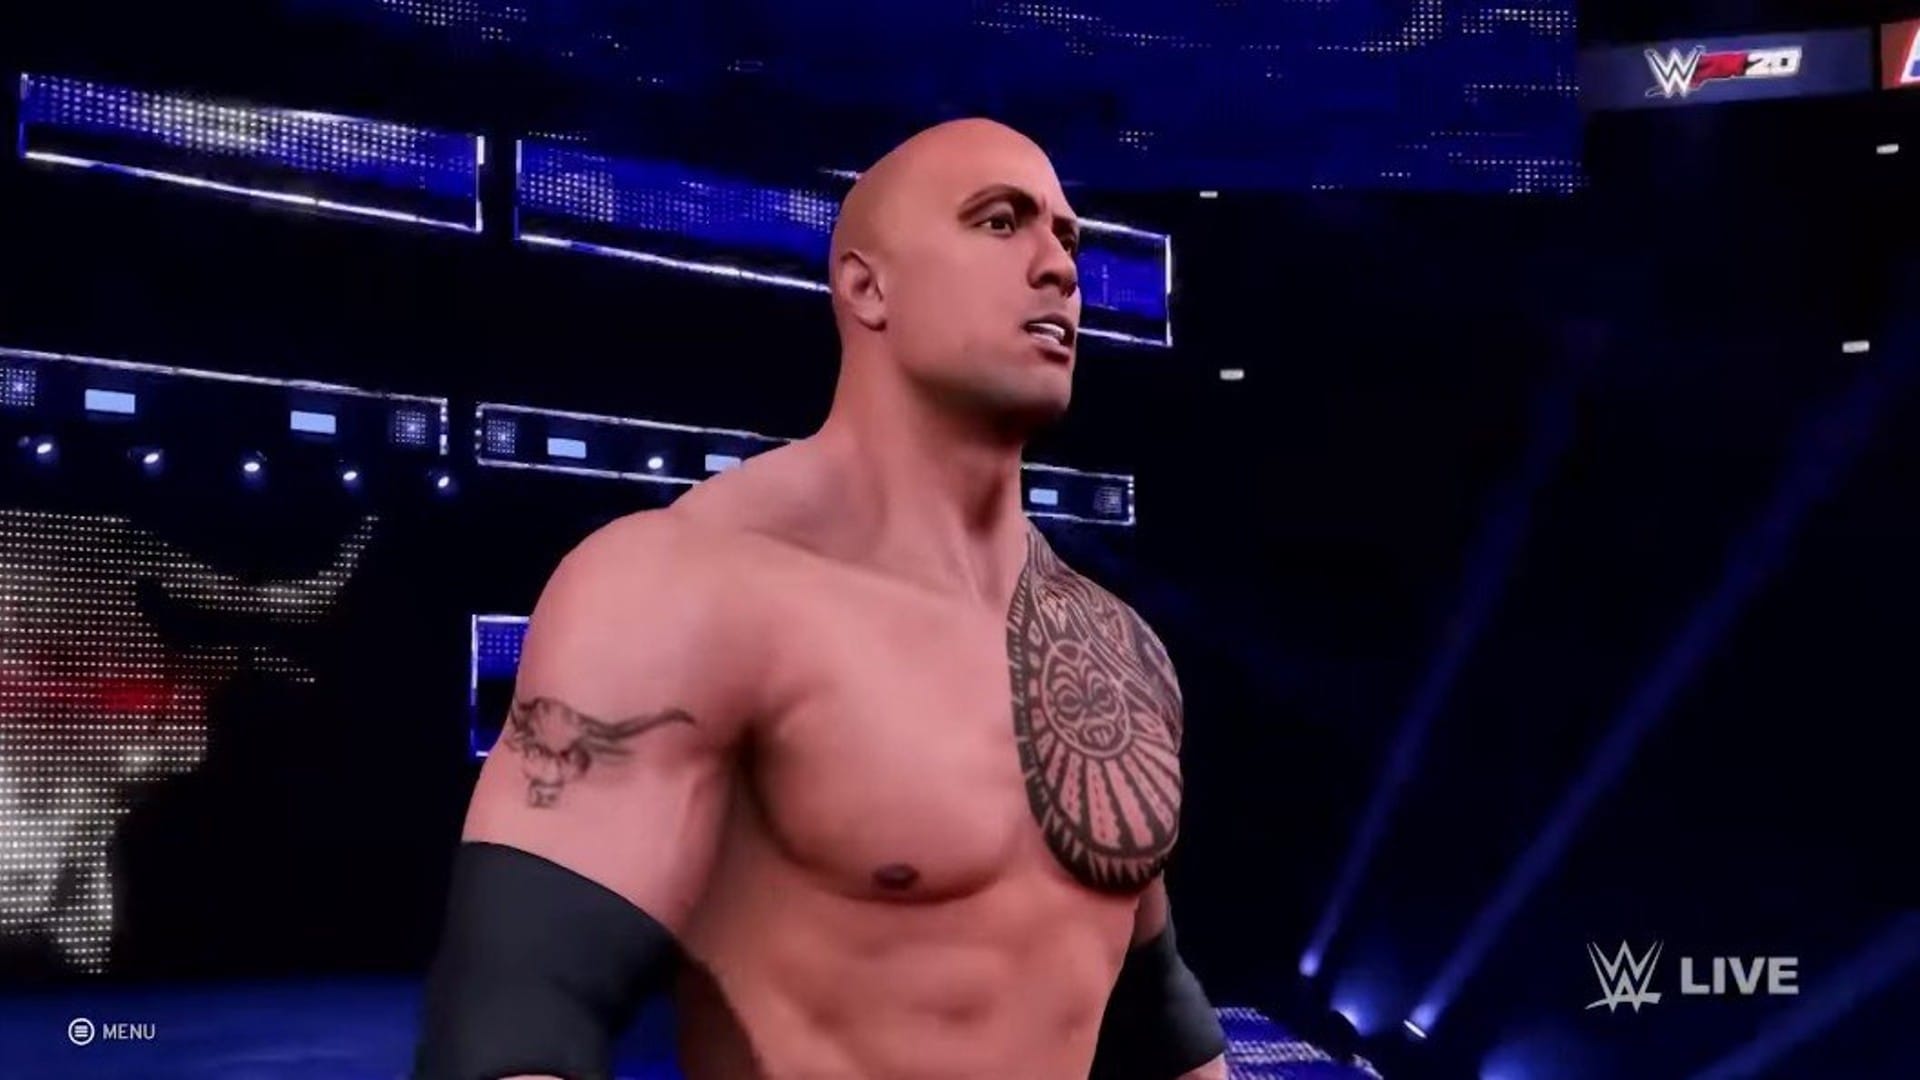 WWE 2K20 The Rock apparently